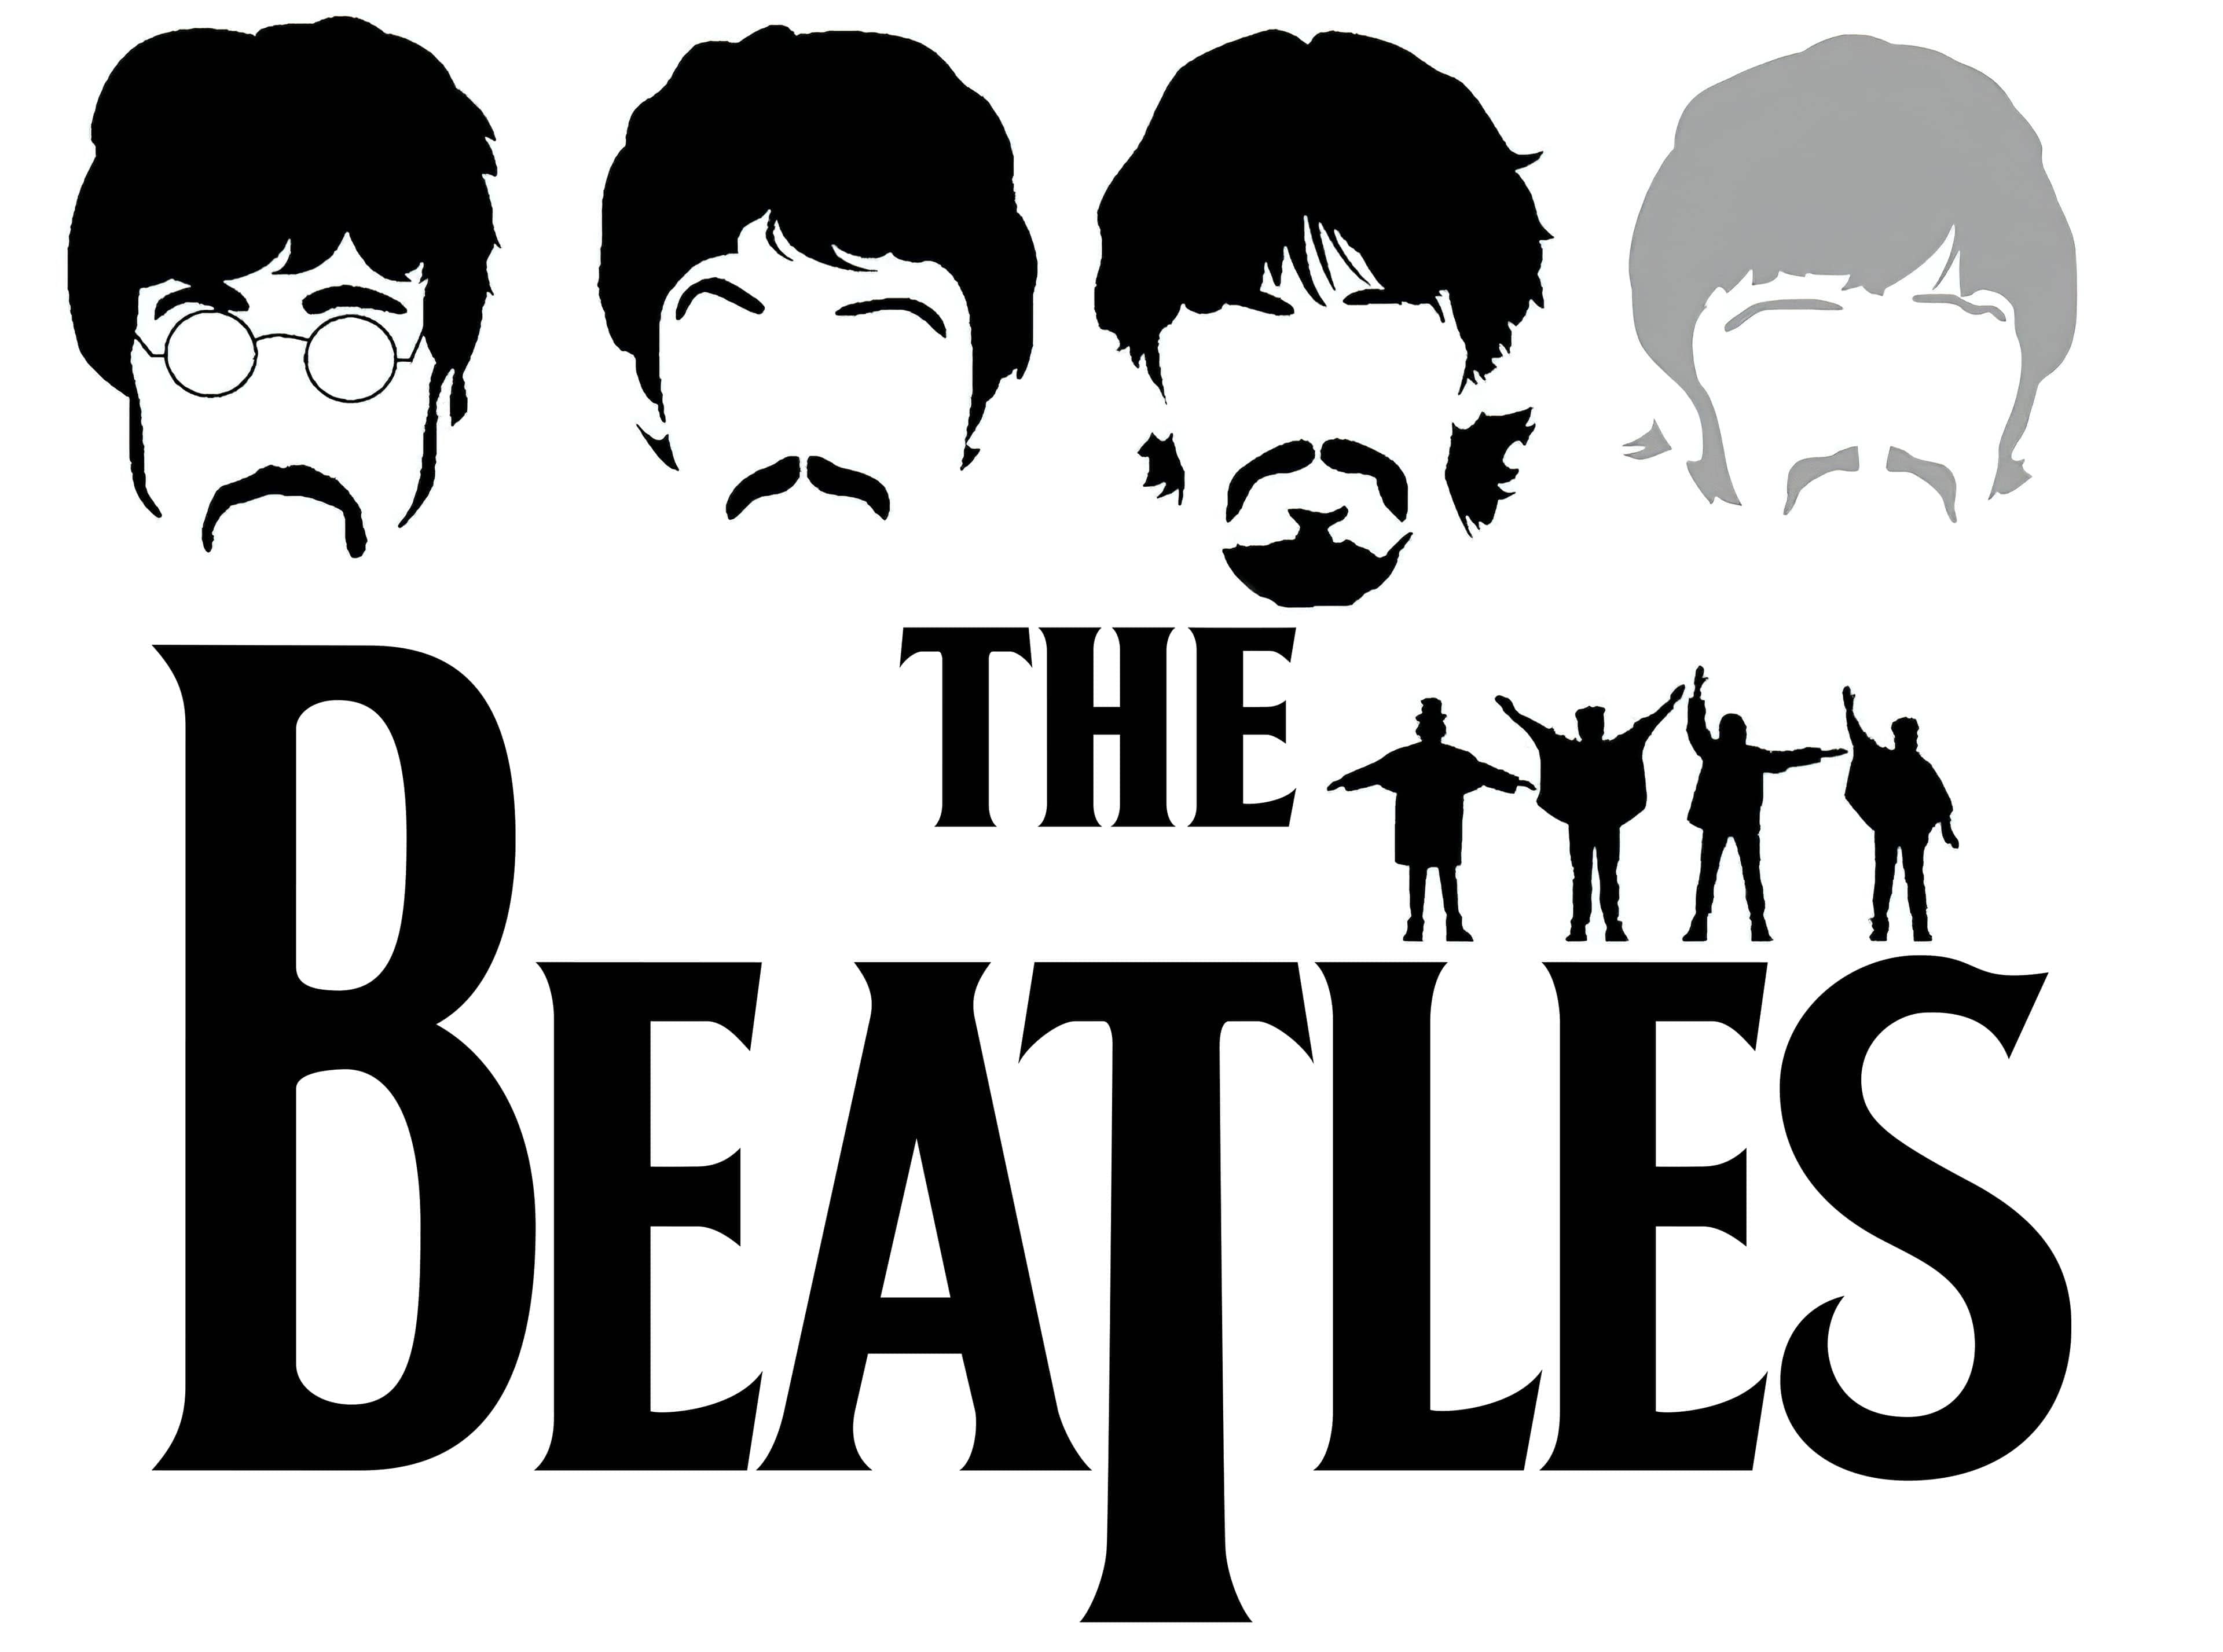 How the Beatles got their famous logo